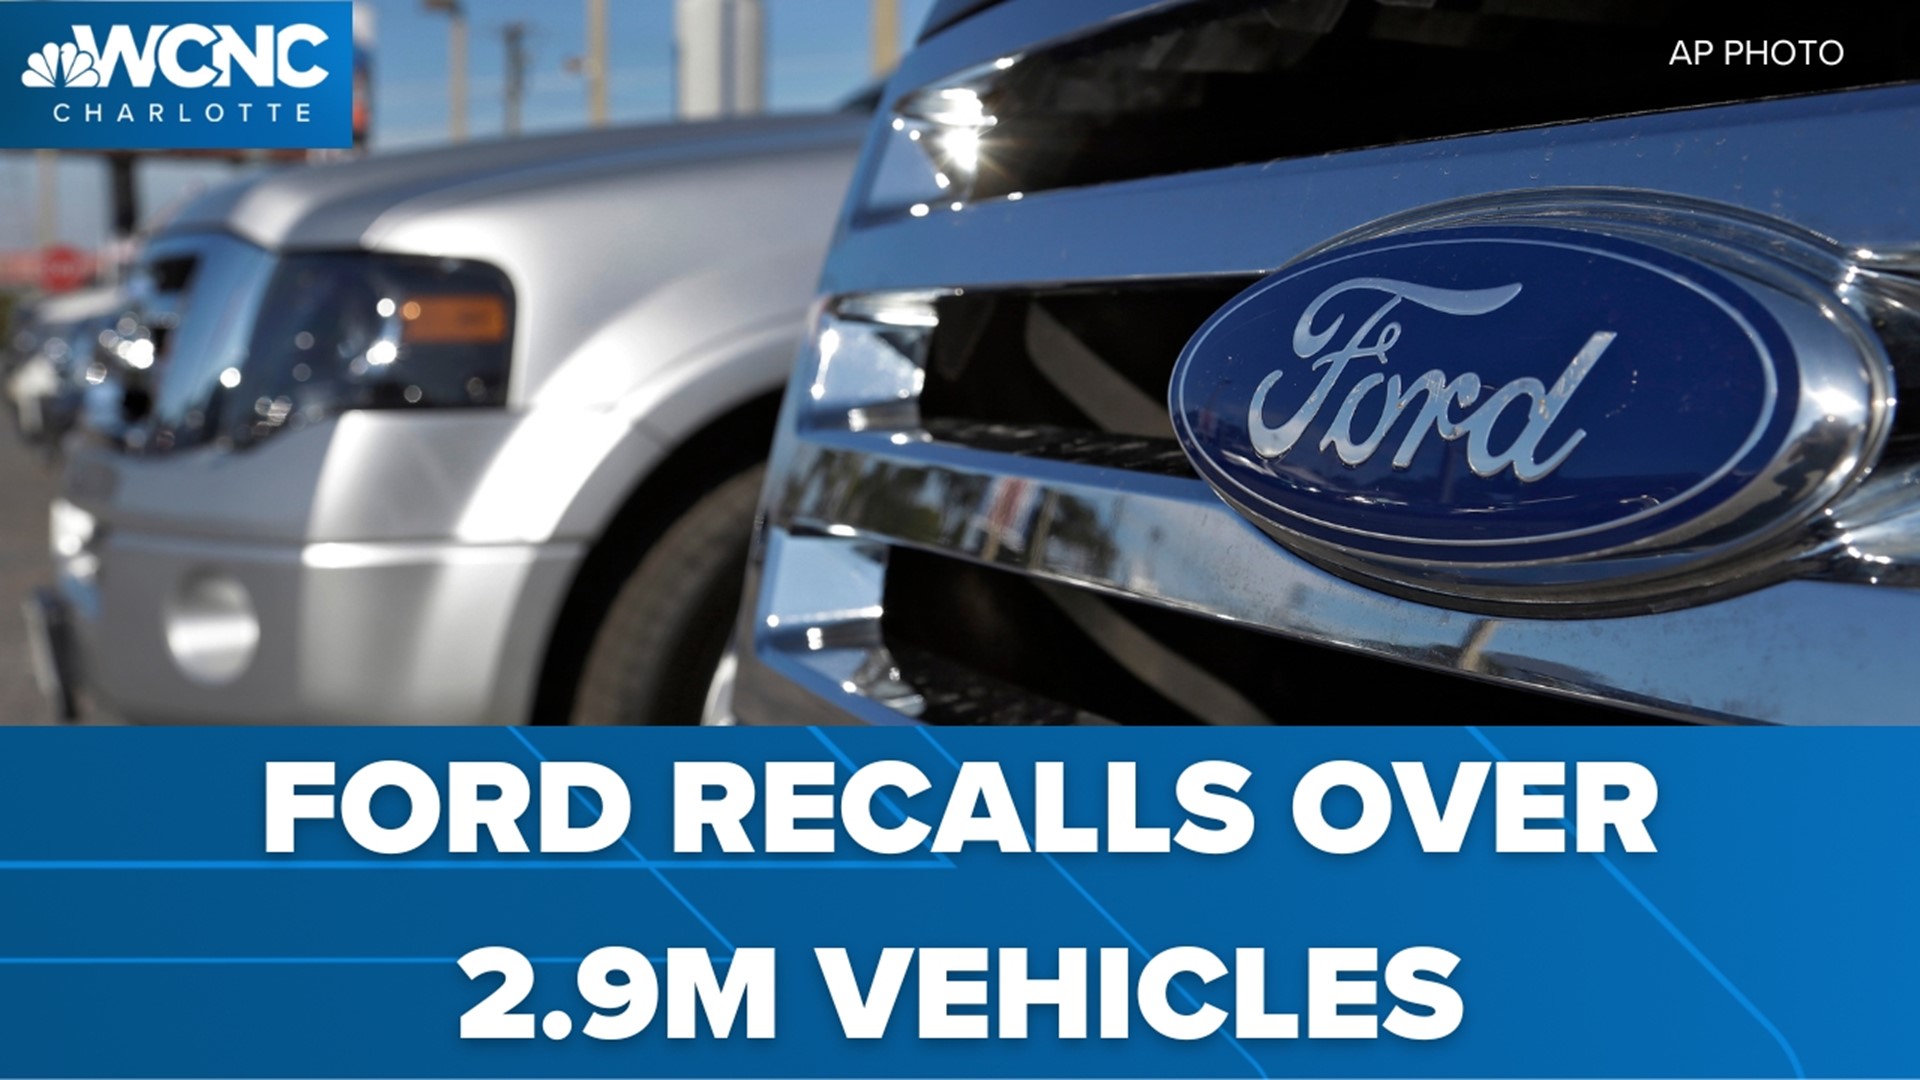 Nearly three-million Ford vehicles are being recalled because they could roll away even when they are in park.